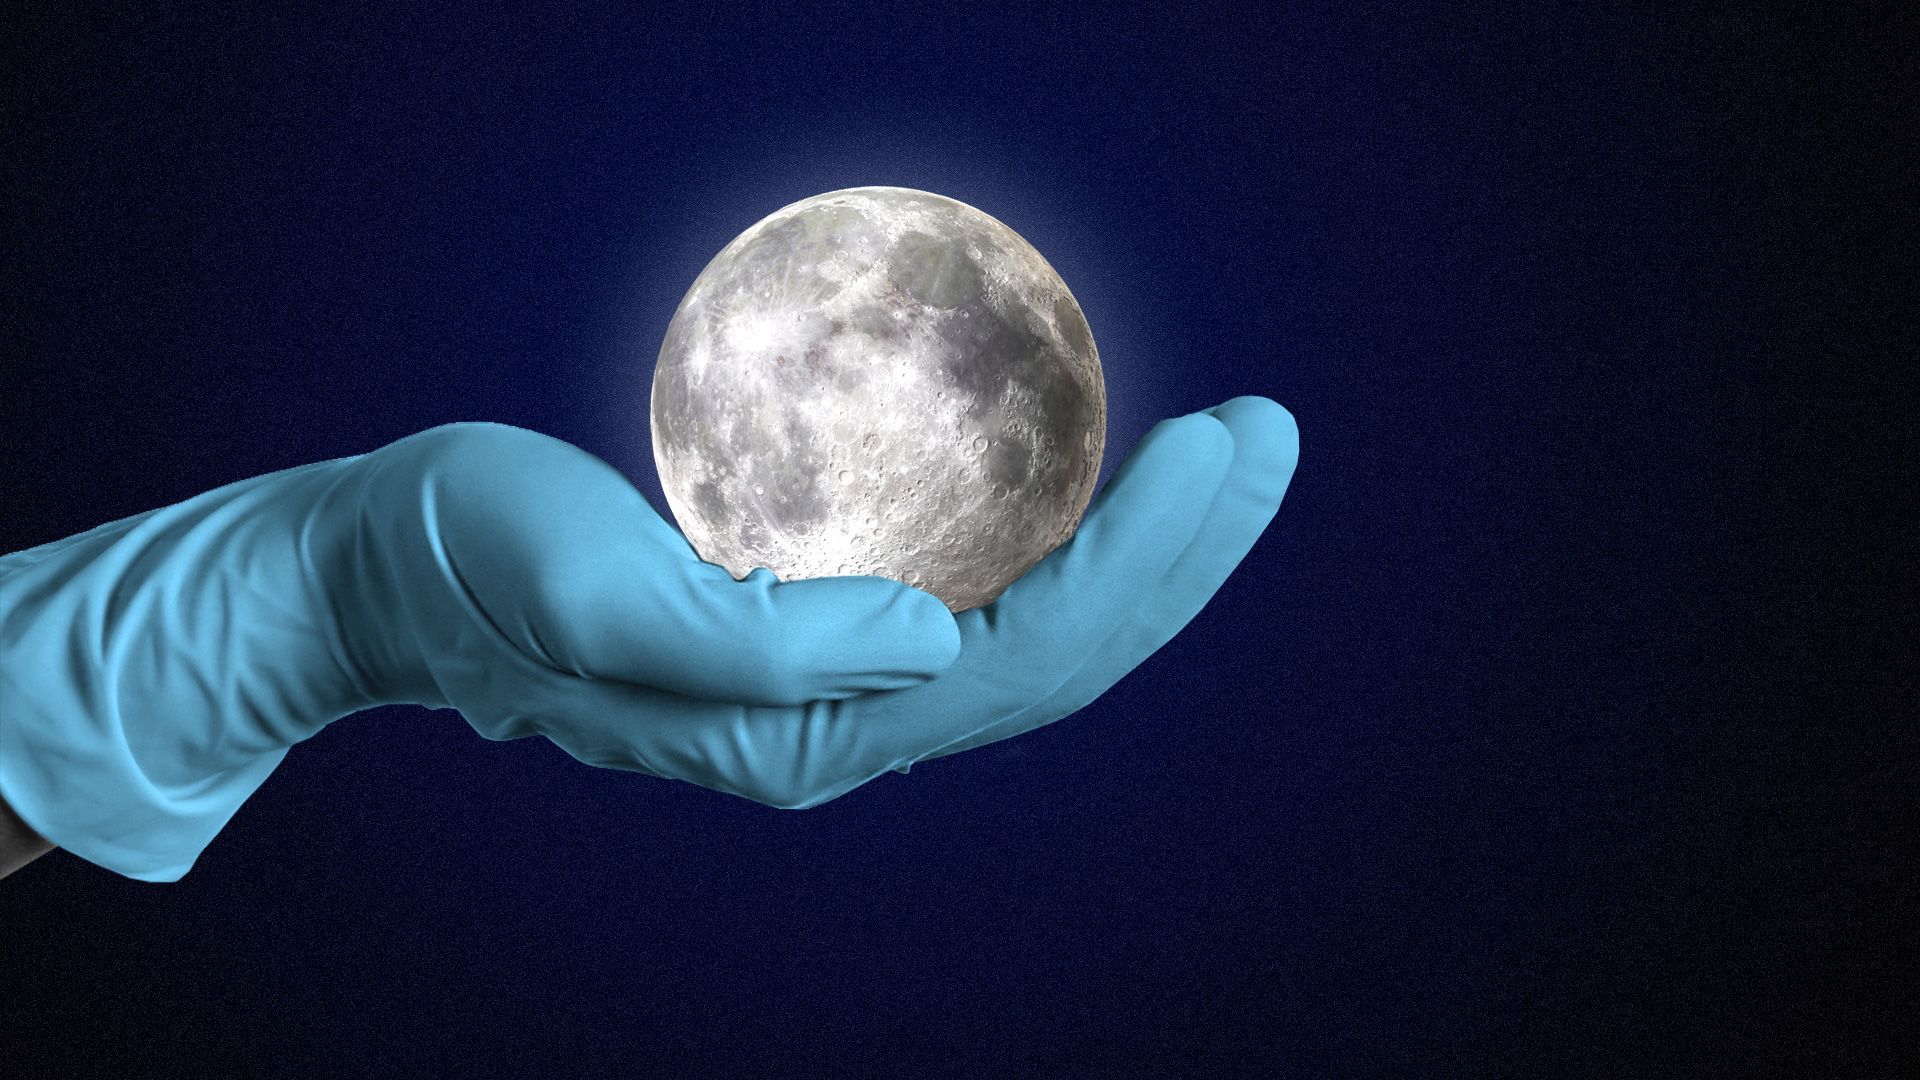 A hand with a latex glove holding the moon